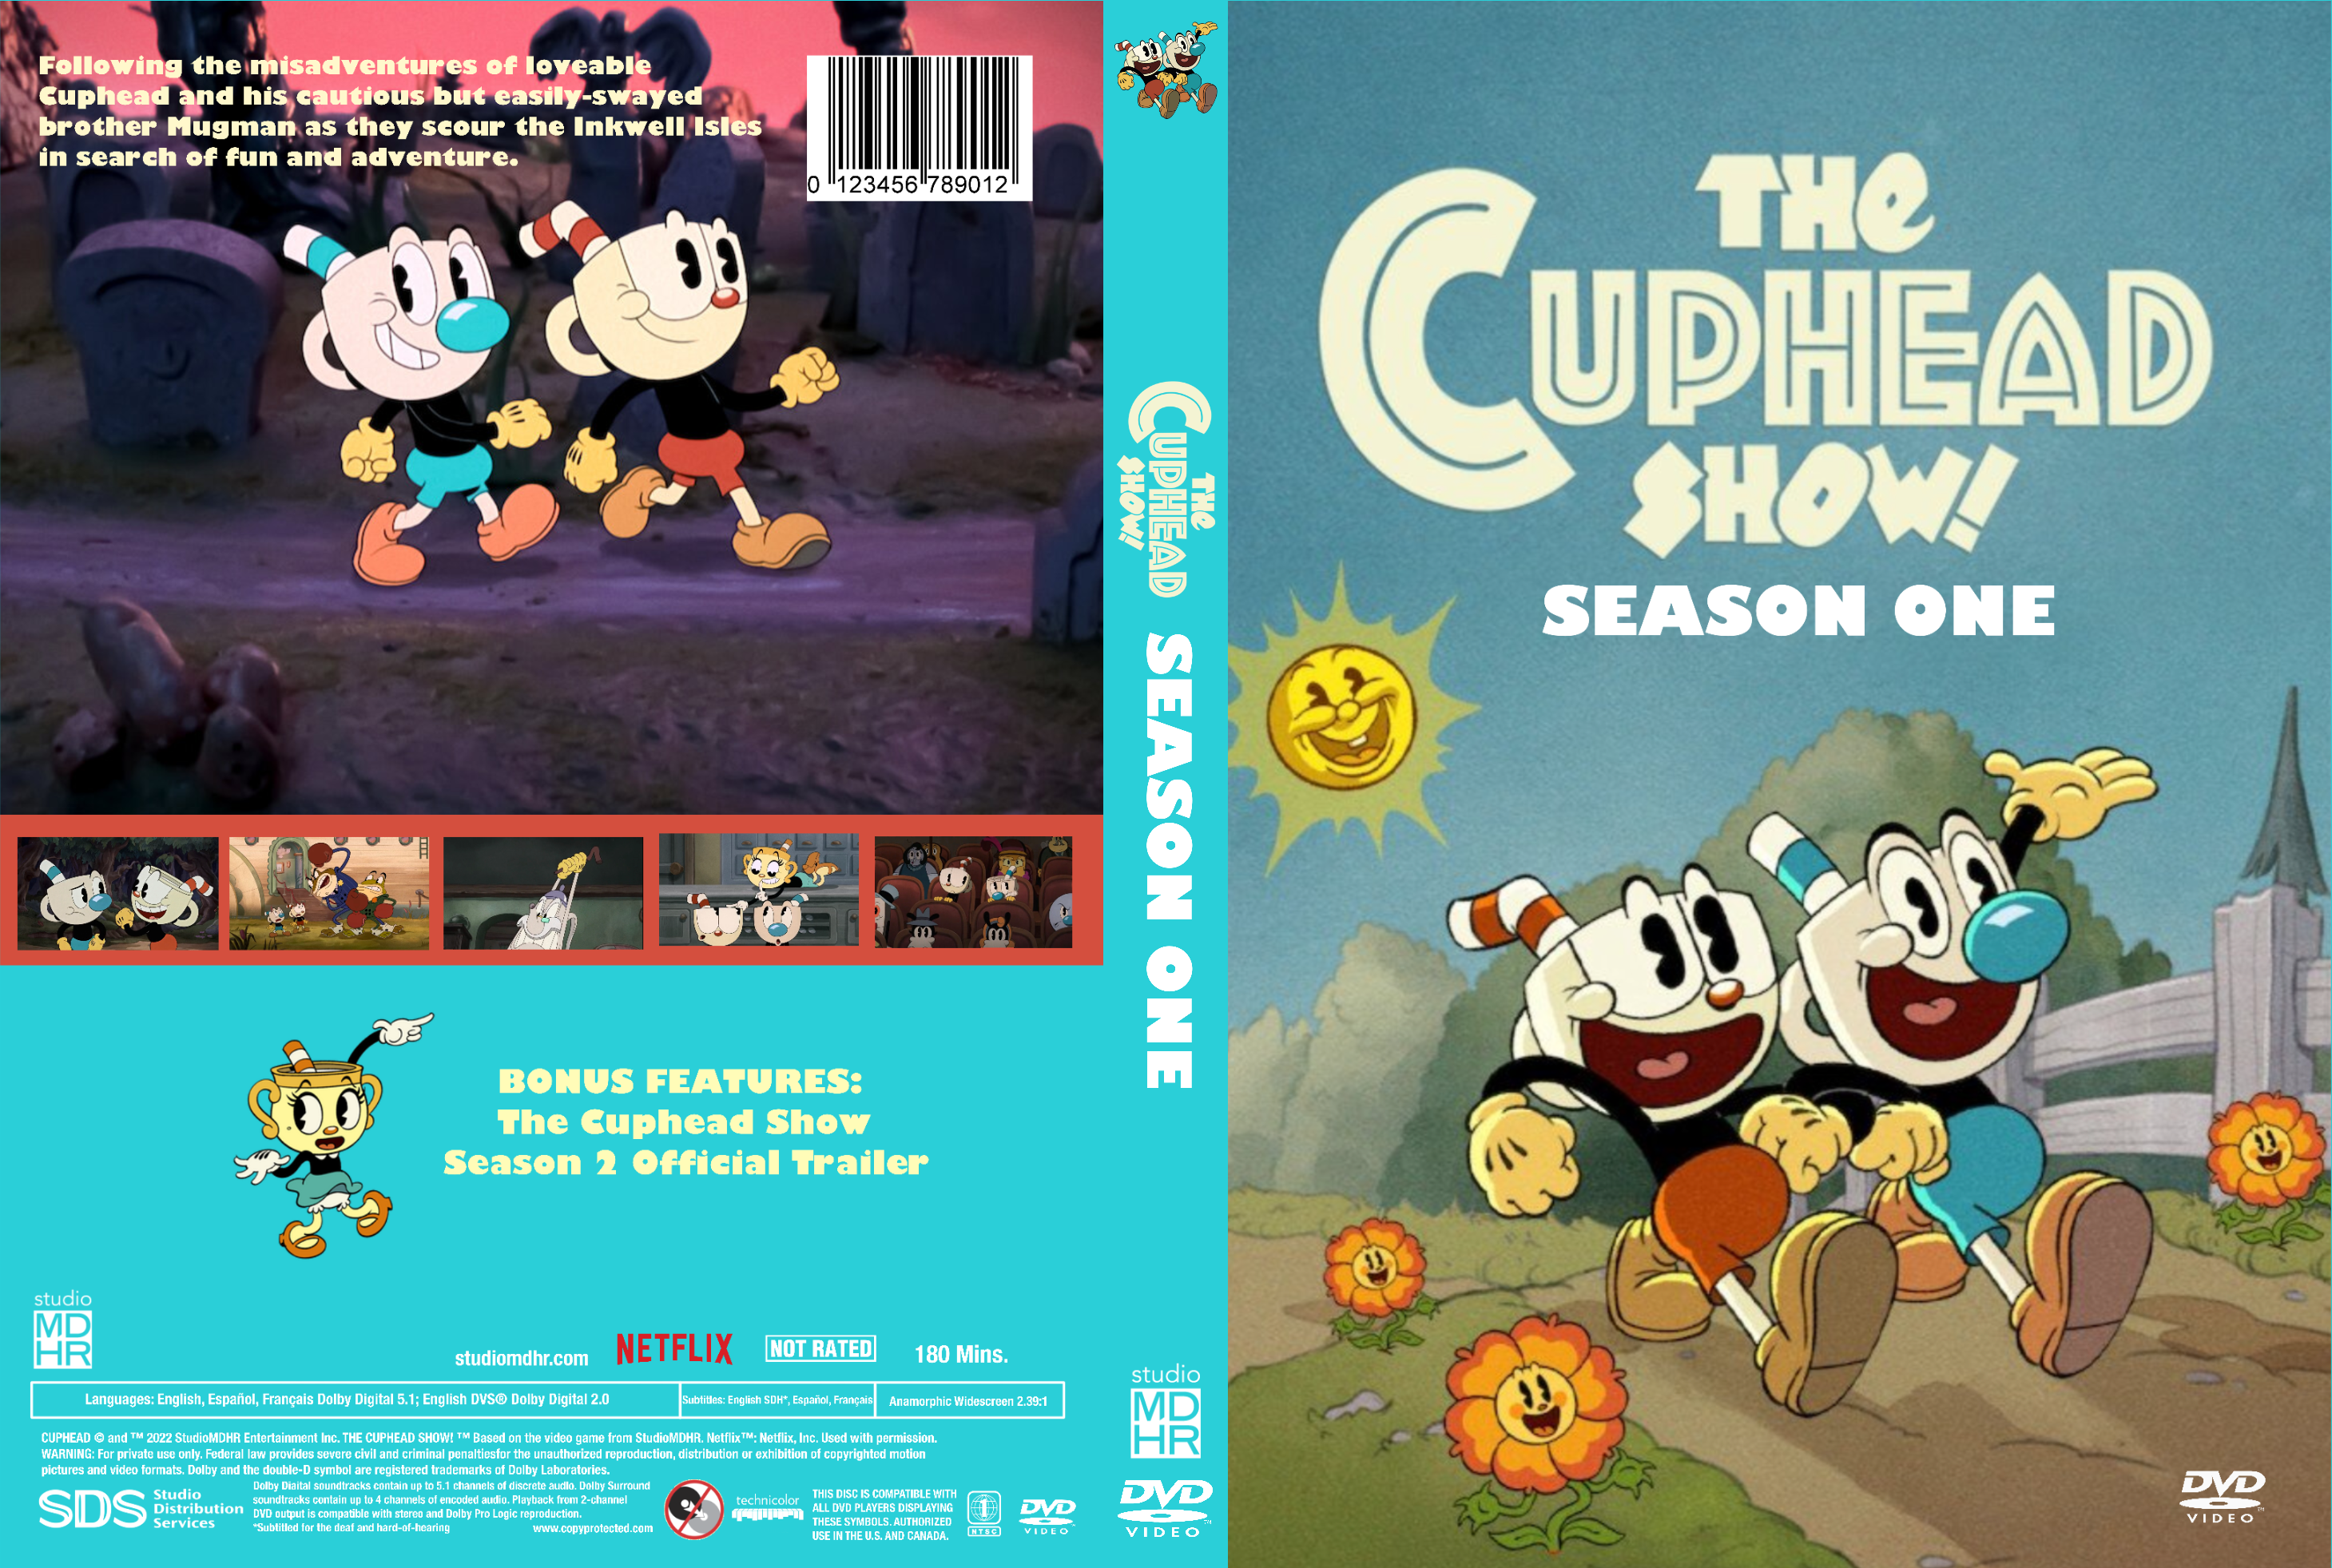 The Cuphead Show Season One (DVD Cover) by SpongeBobZella20 on